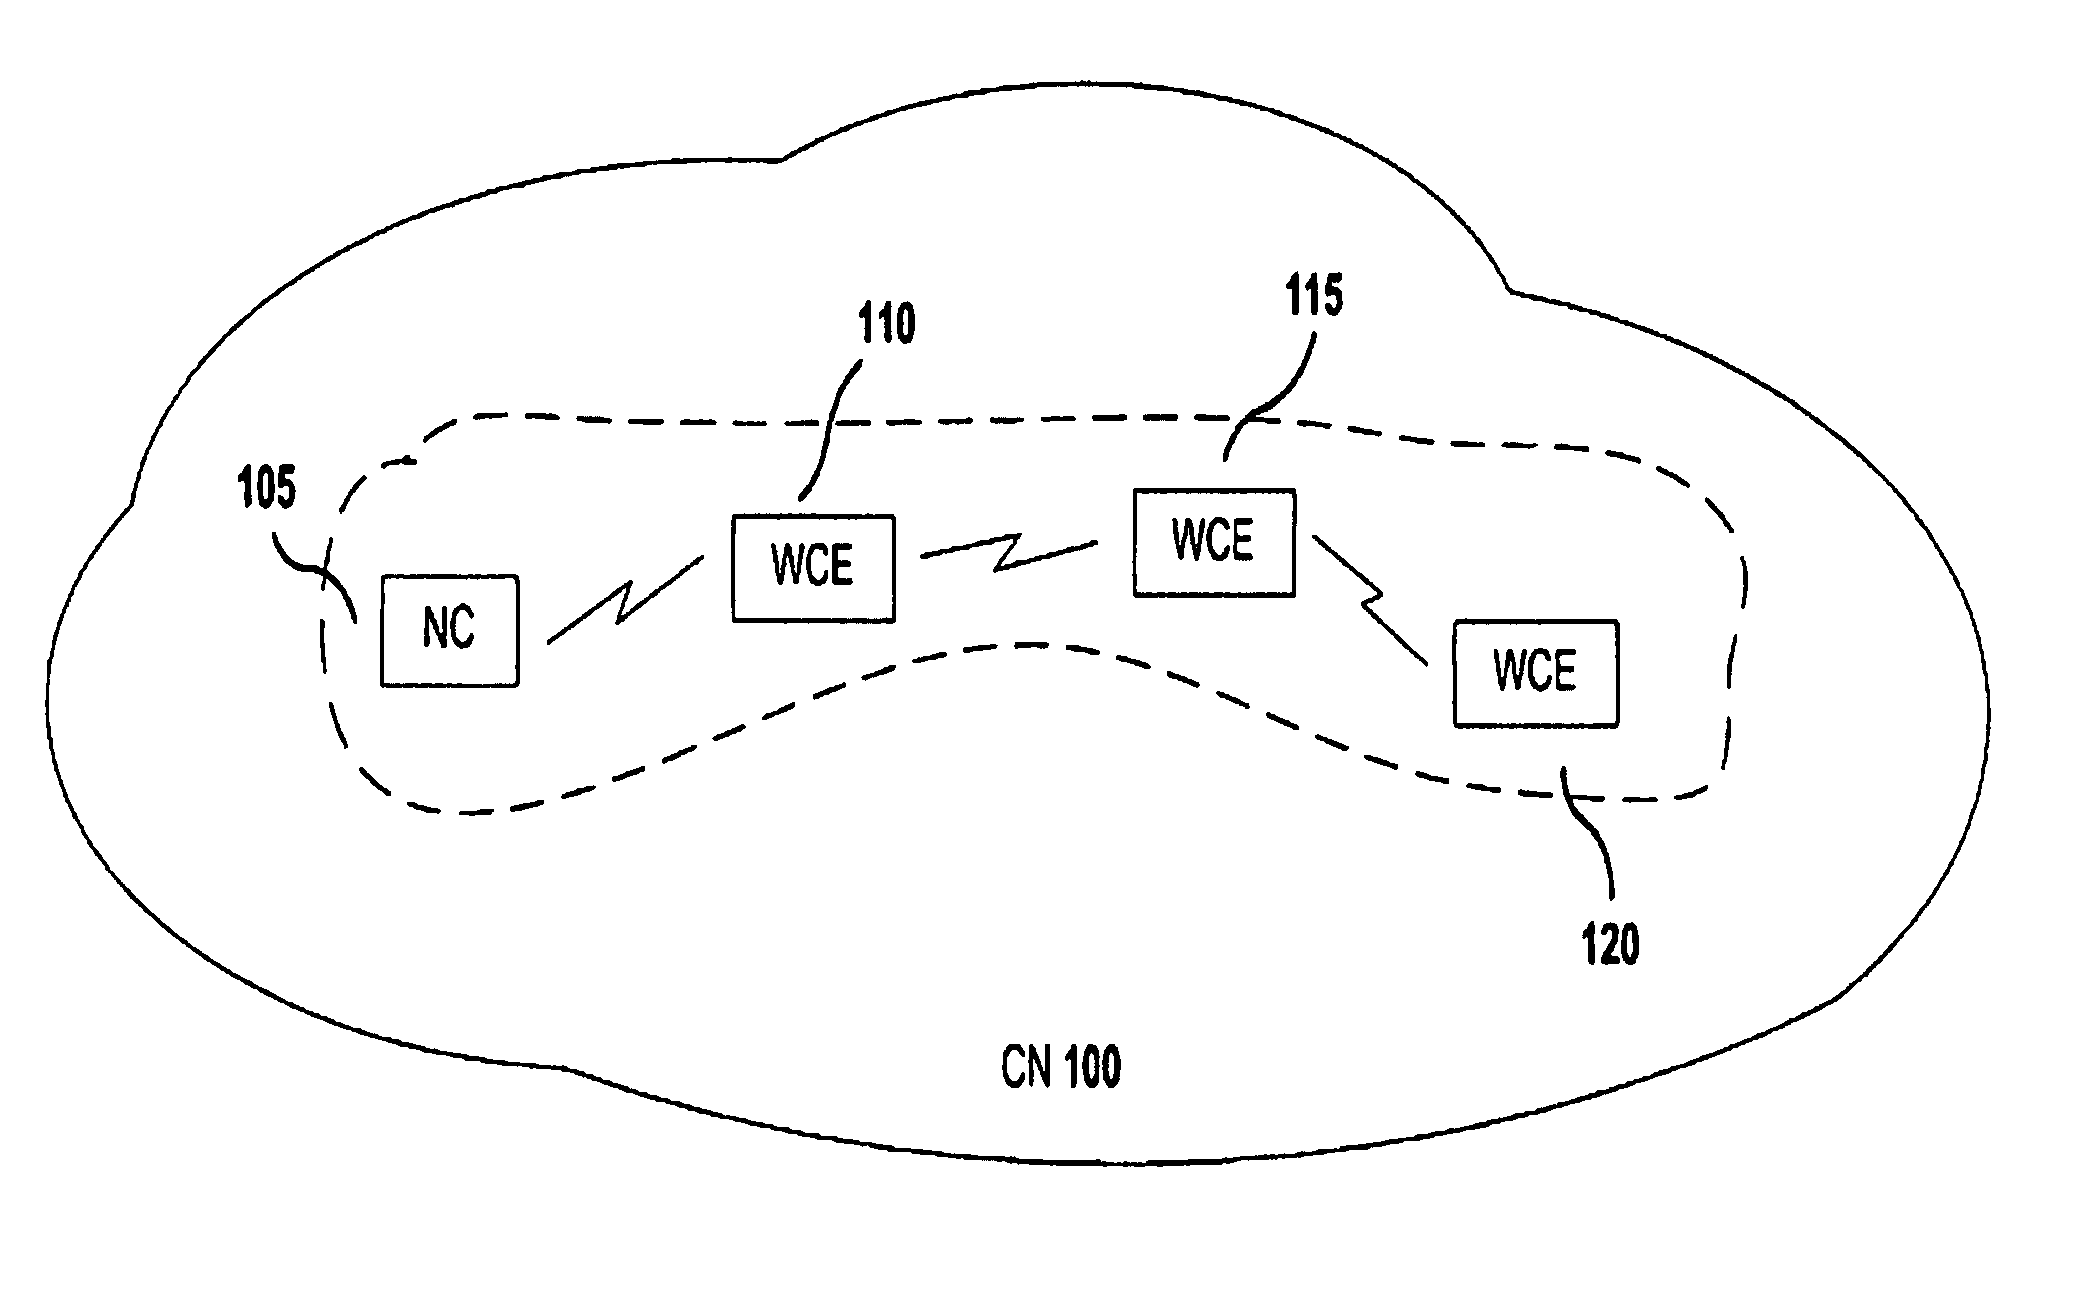 Method for selective distribution of communications infrastructure